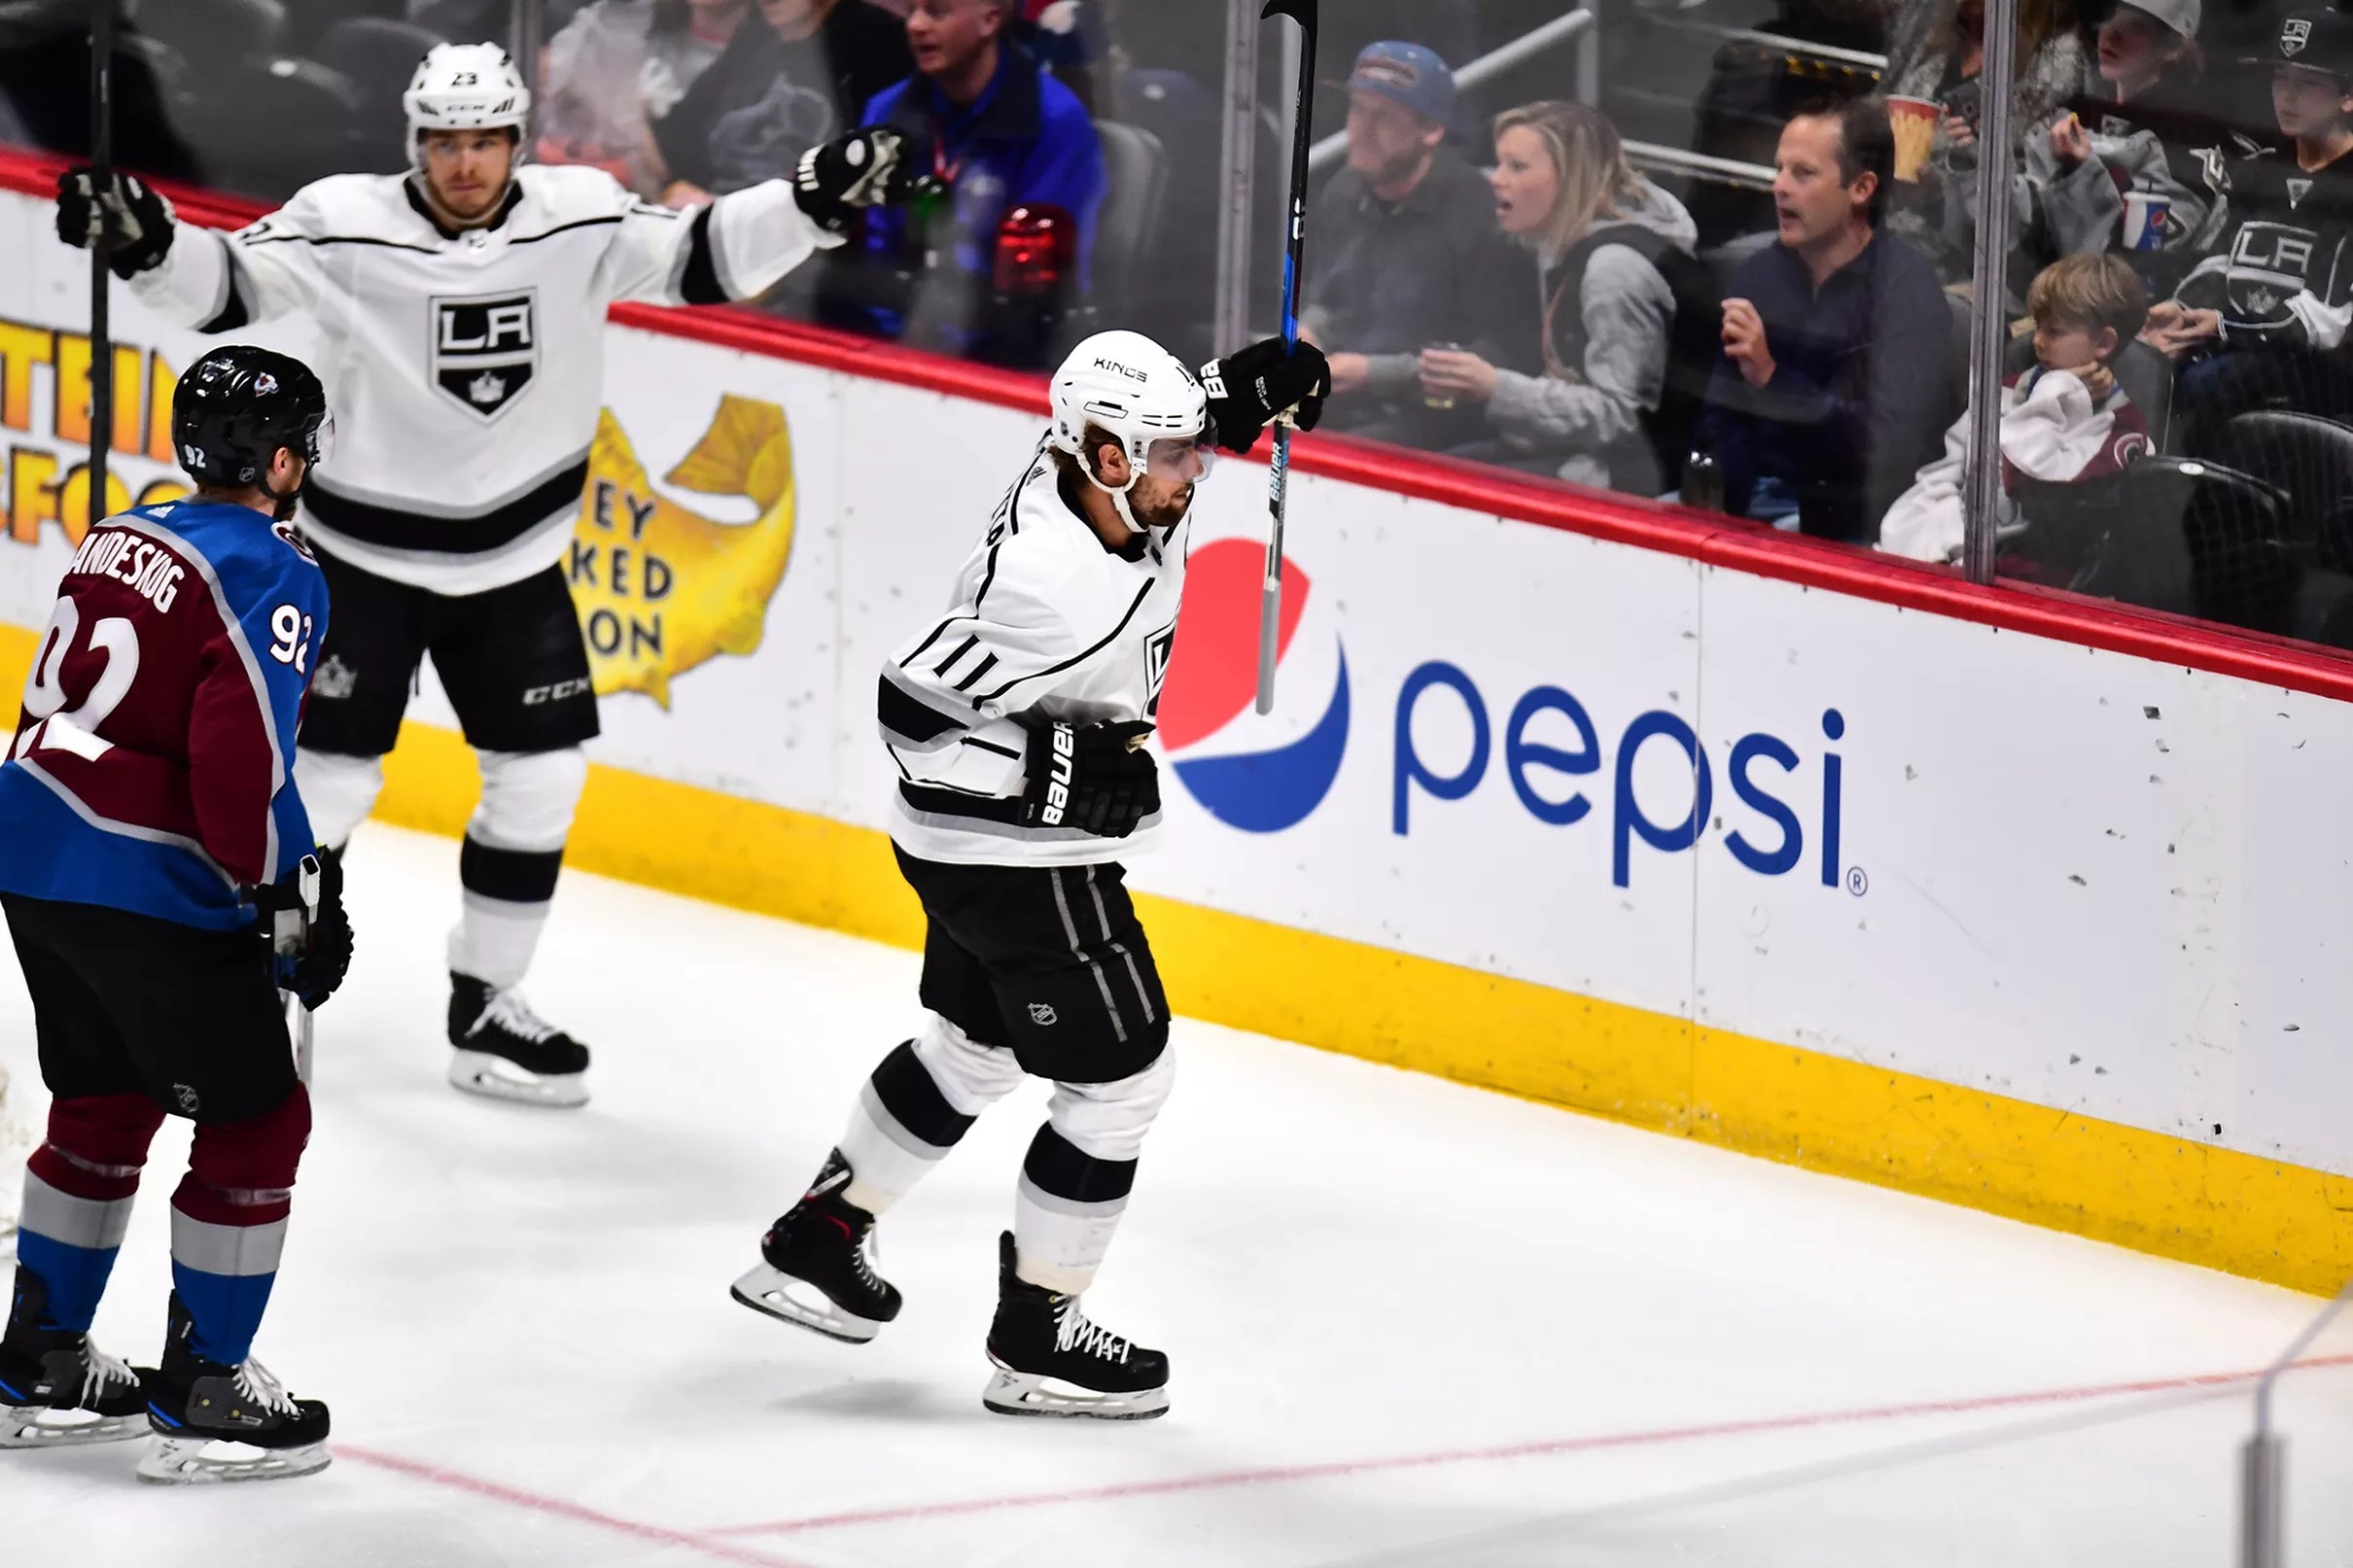 Game Day Preview #80, Colorado Avalanche @ Los Angeles Kings